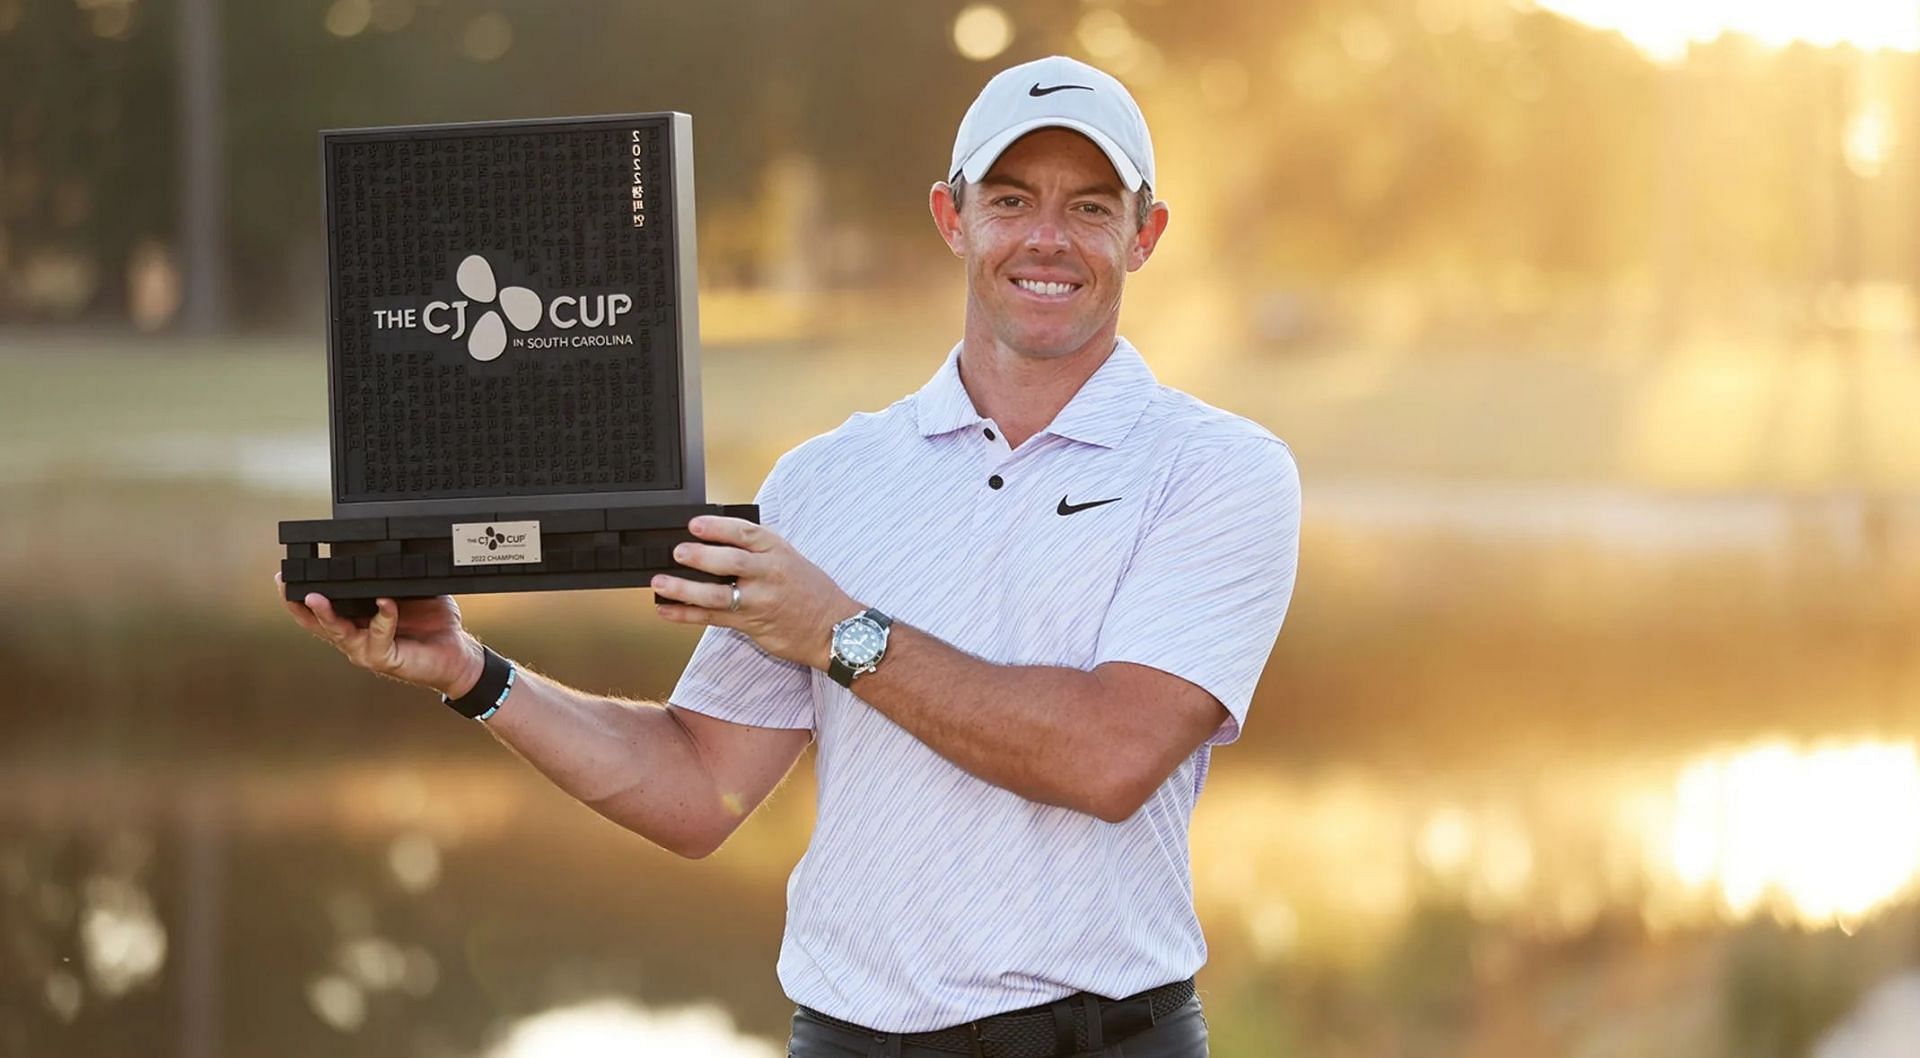 Rory McIlroy successfully defended the CJ Cup